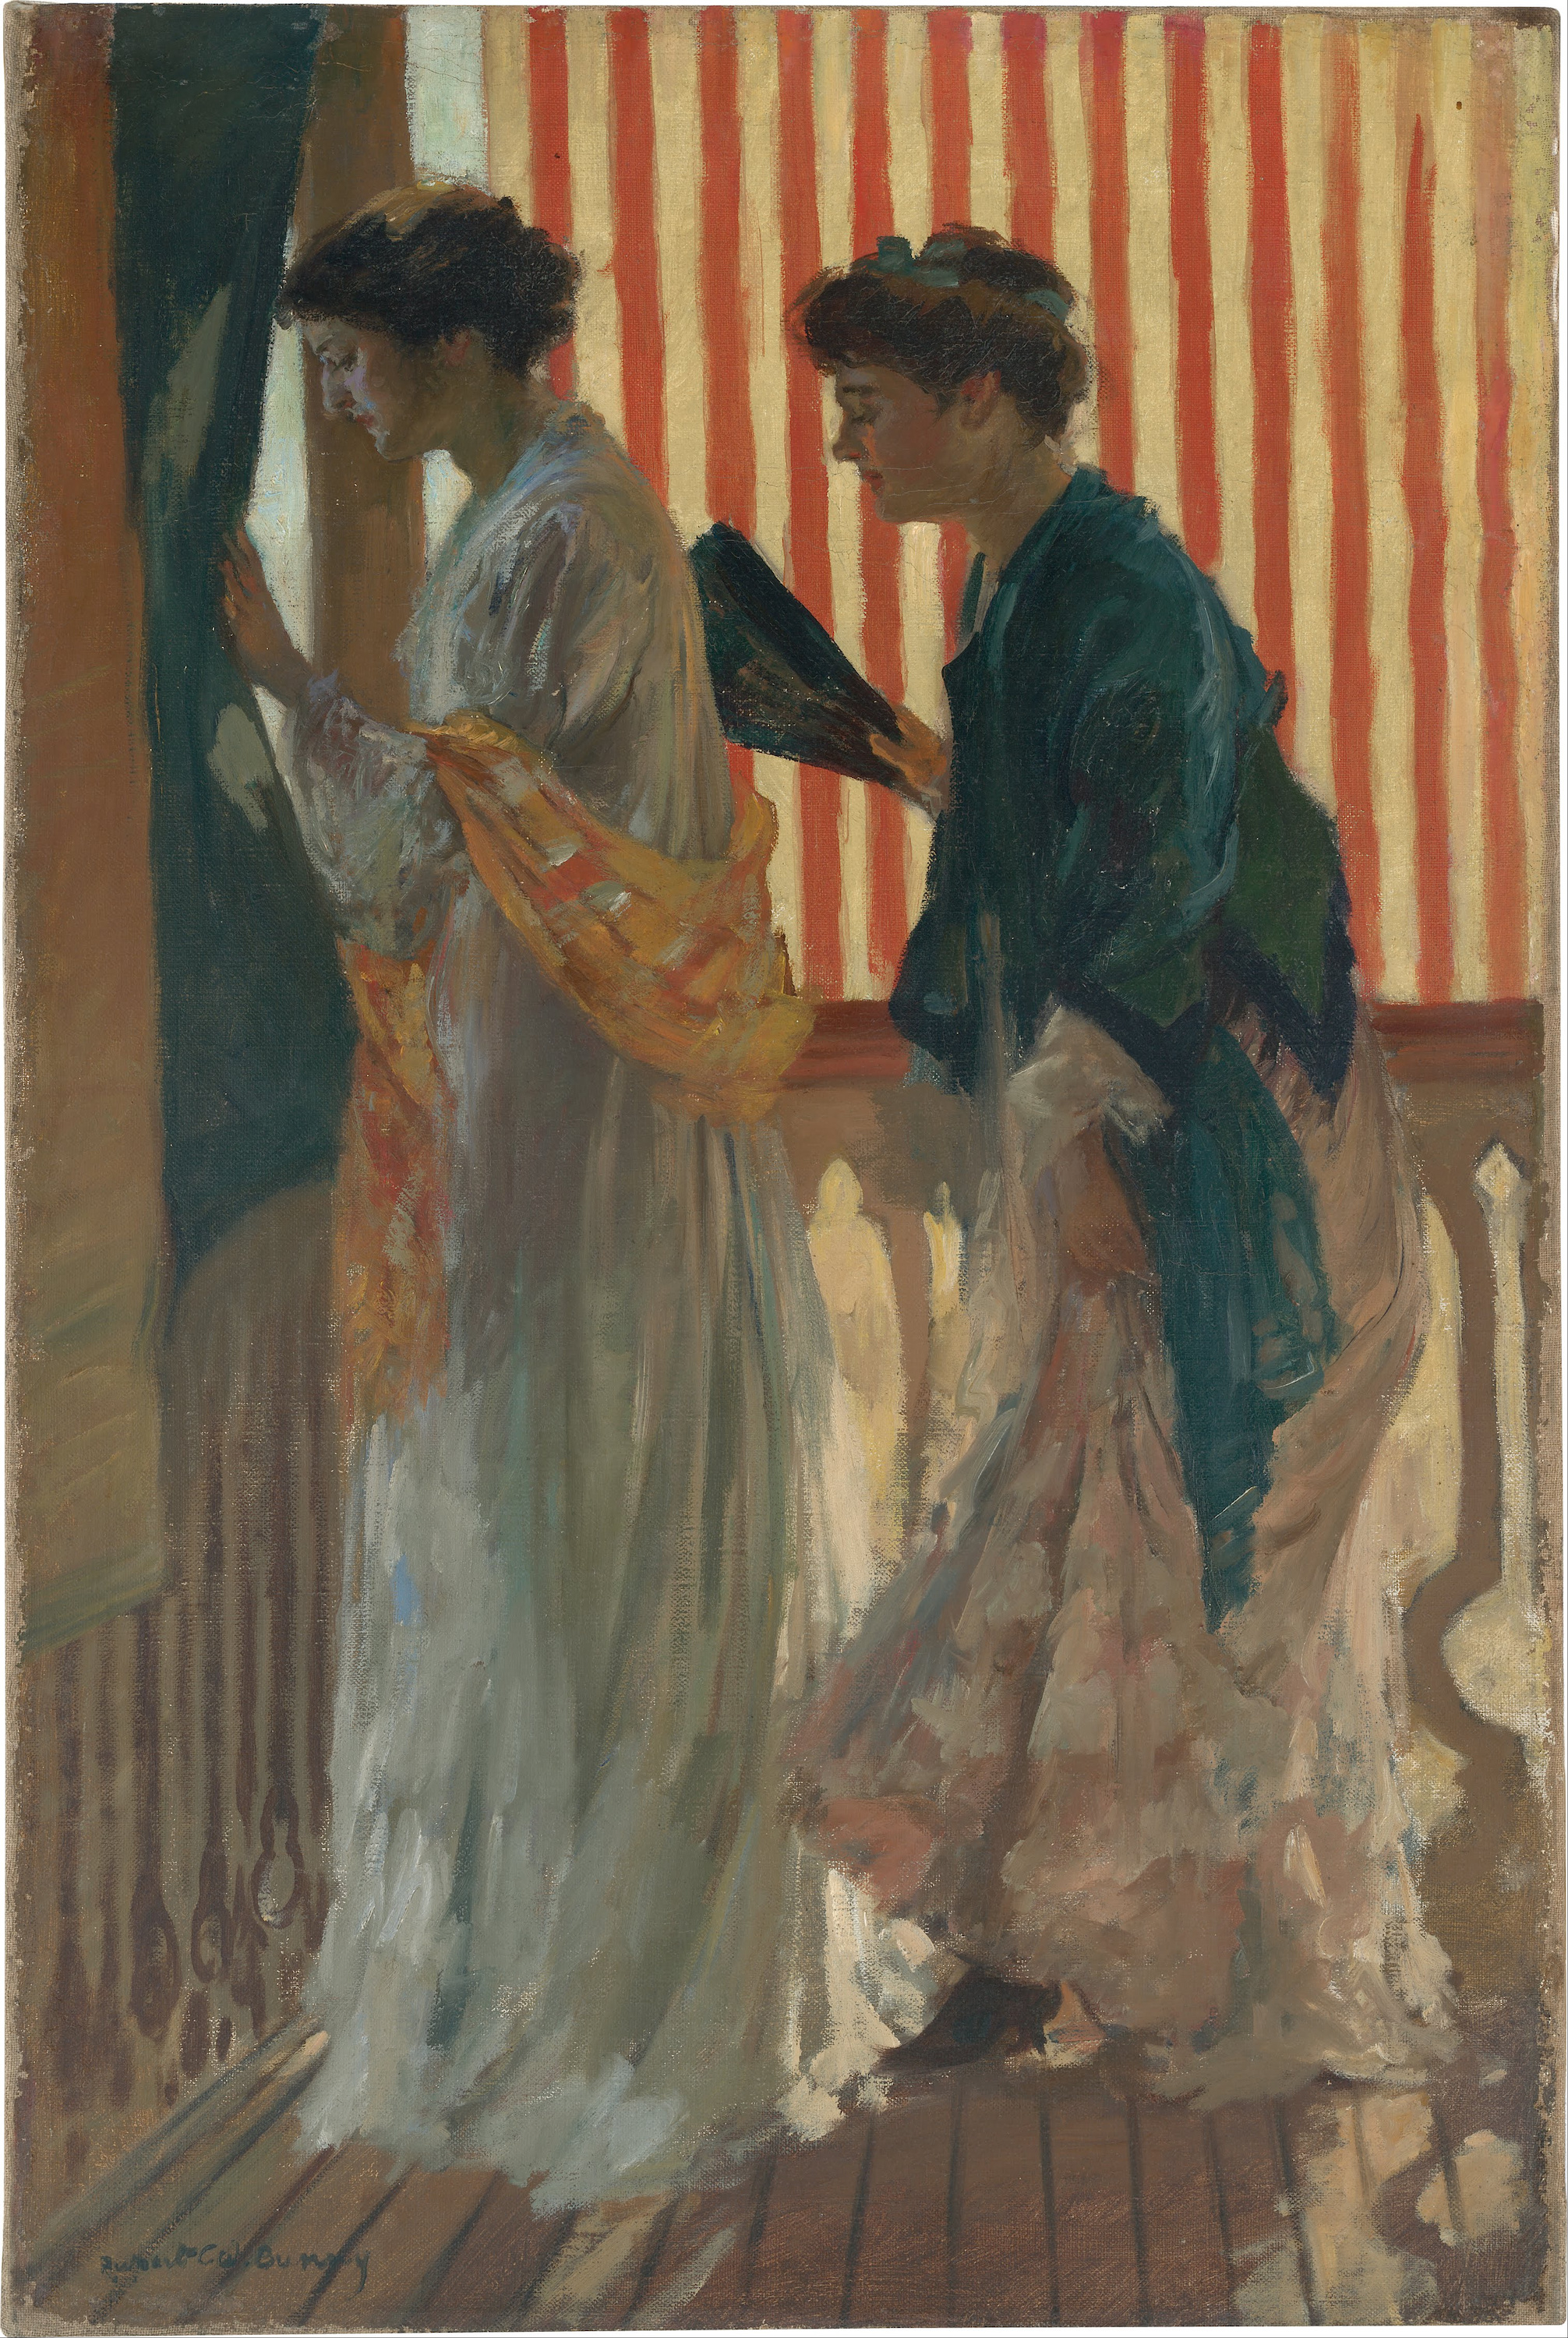 Who comes? by Rupert Bunny - c.1908 - 54.2 x 81 cm National Gallery of Australia